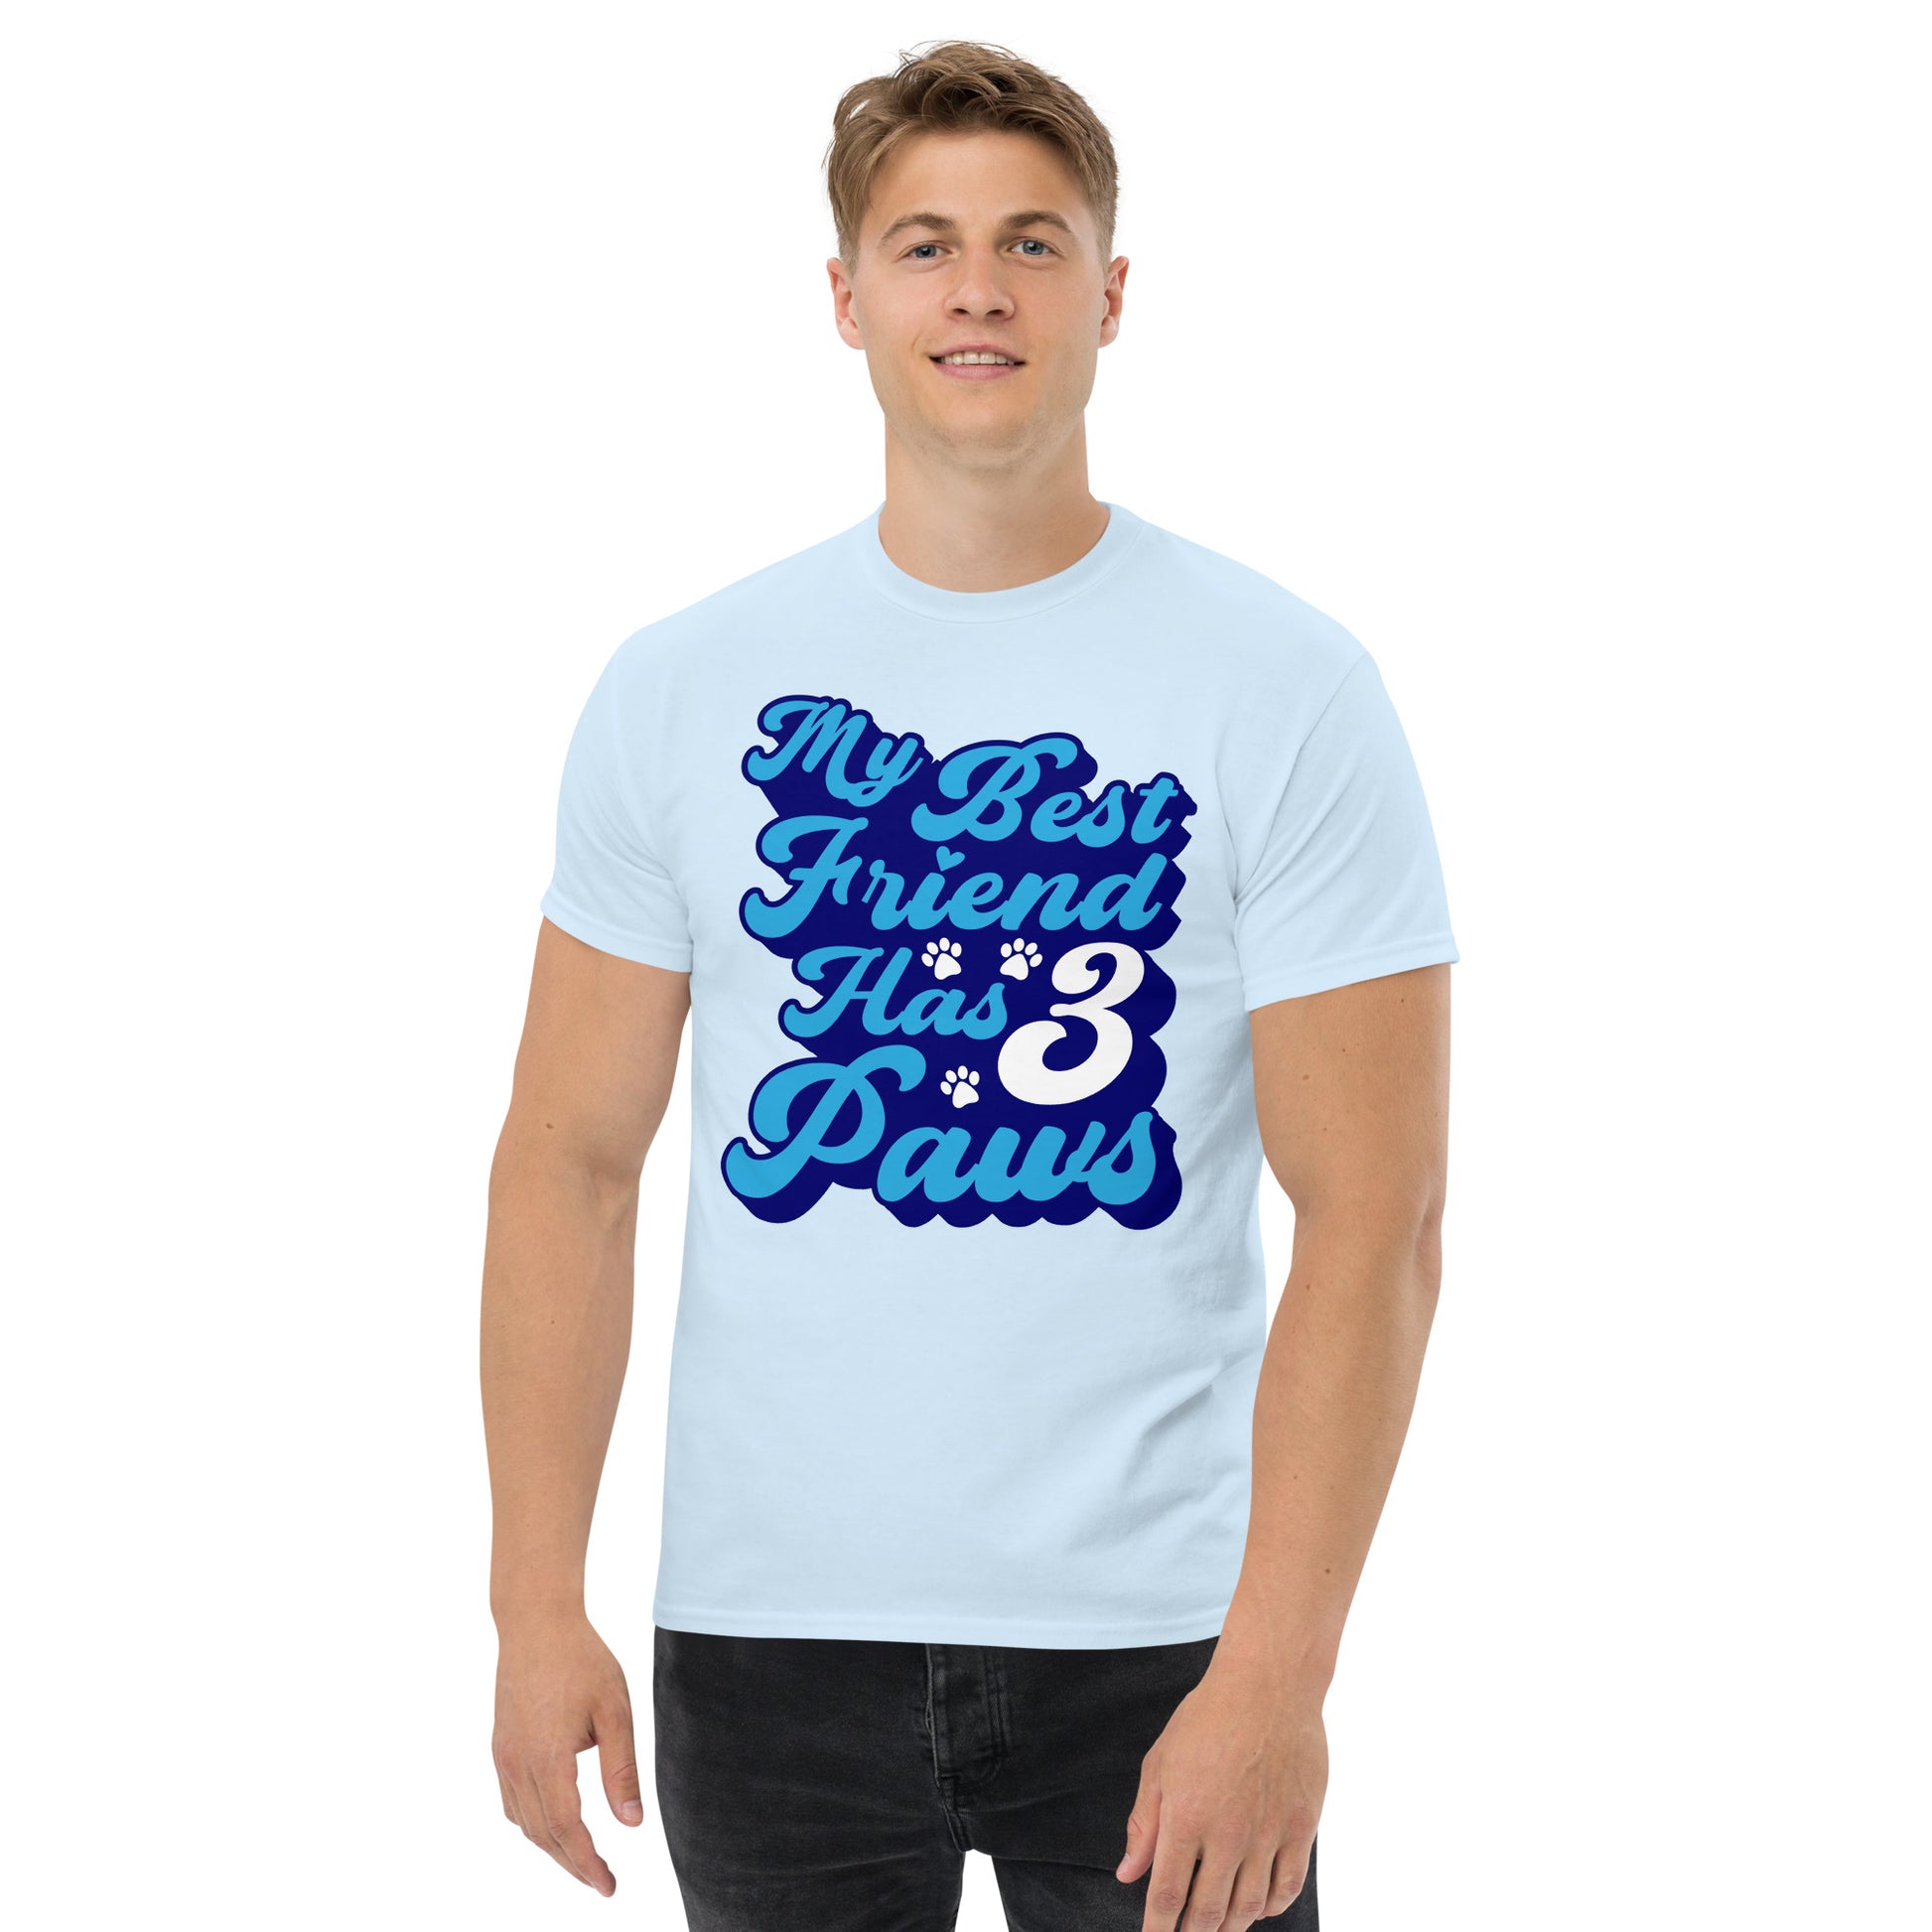 My best friend has 3 Paws men’s t-shirts by Dog Artistry light blue color